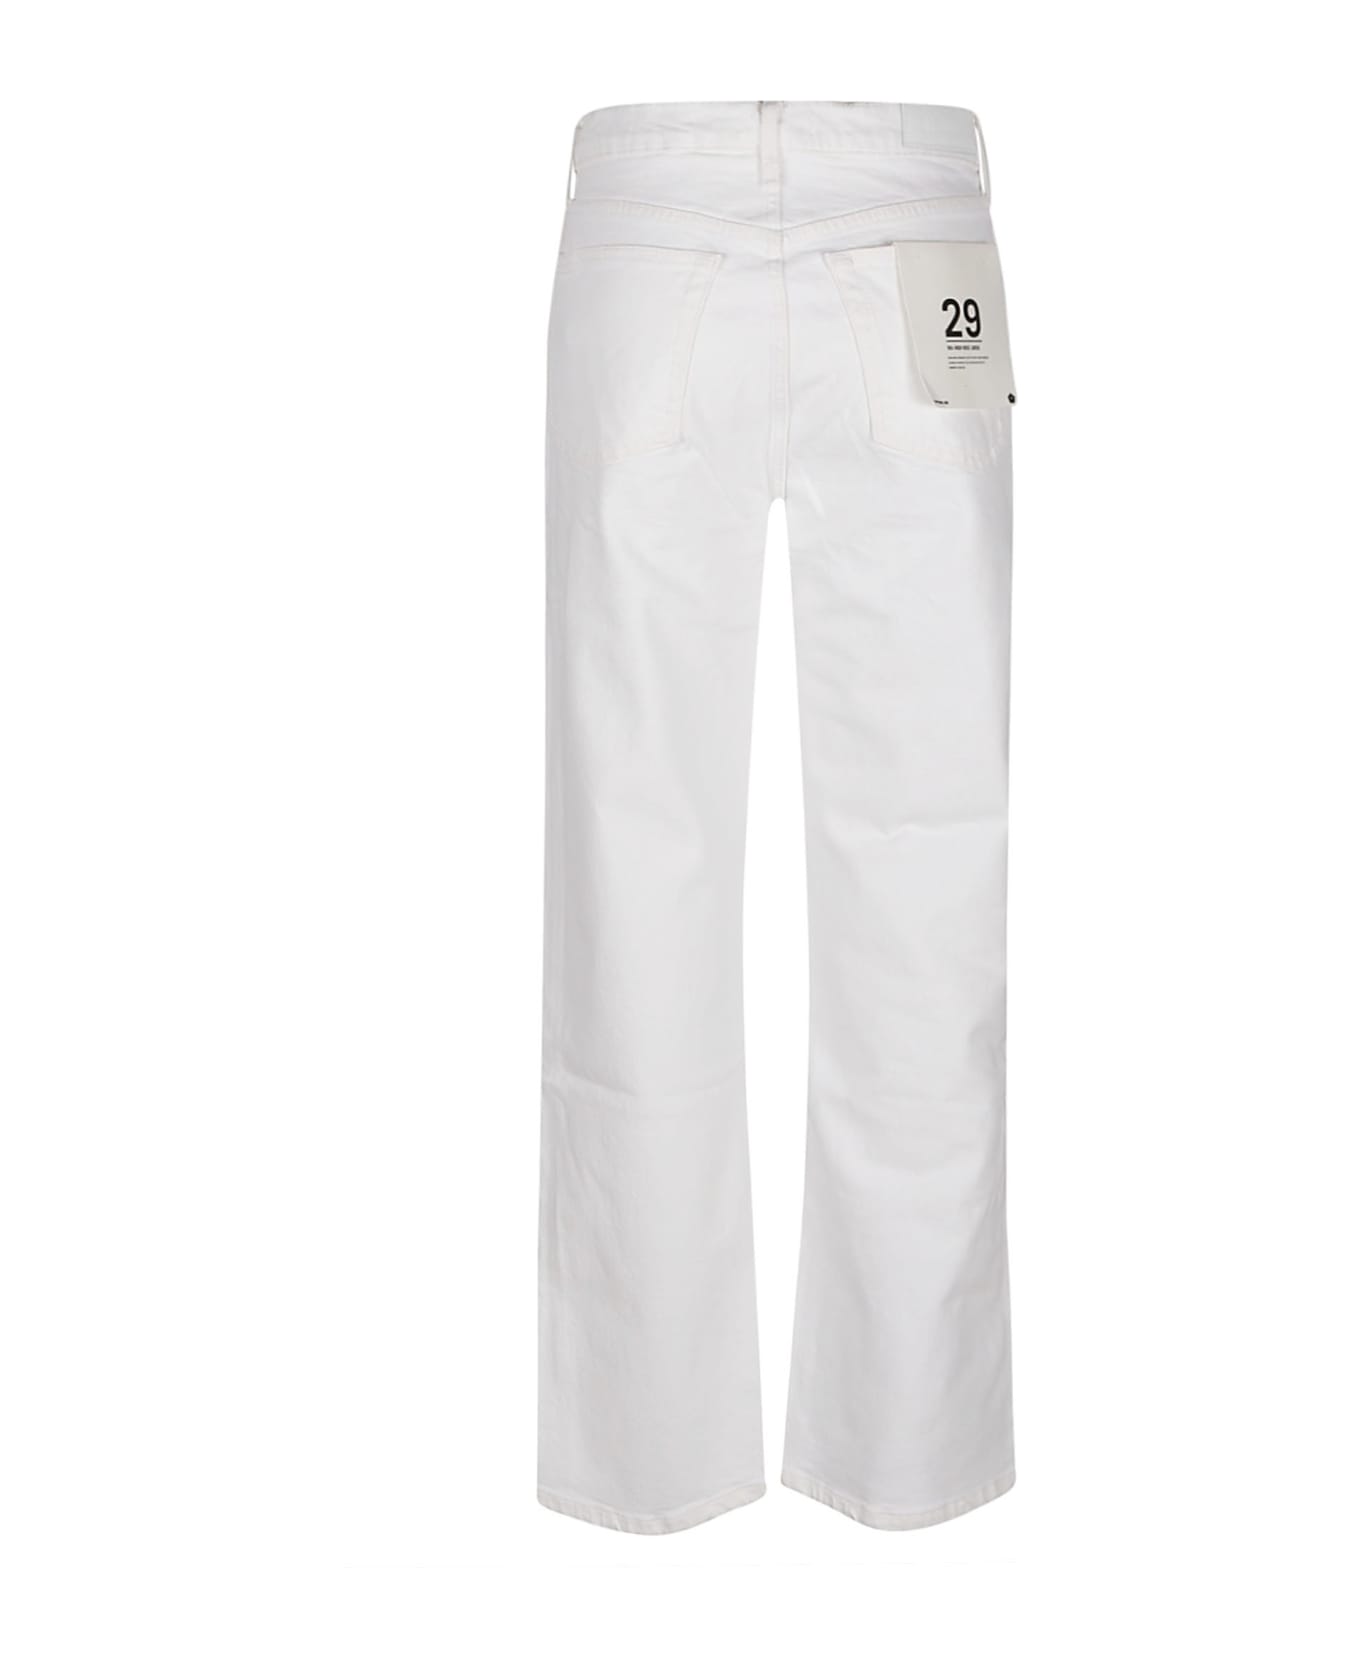 RE/DONE 90s High Rise Loose Jeans - White